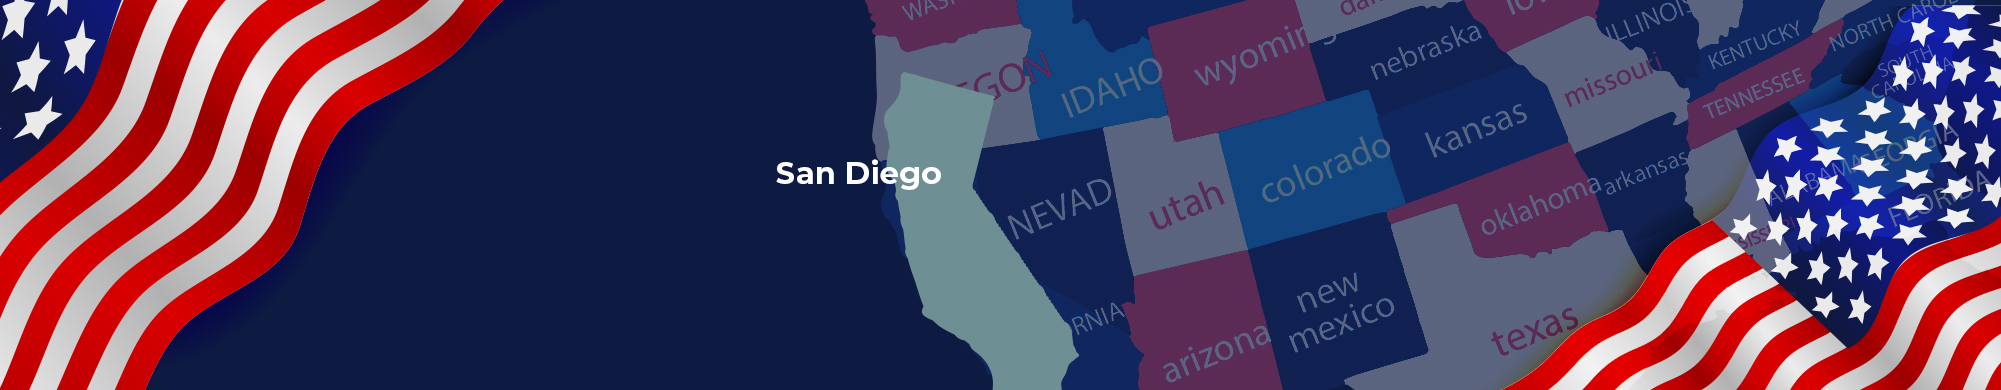 San Diego Small Business Loans